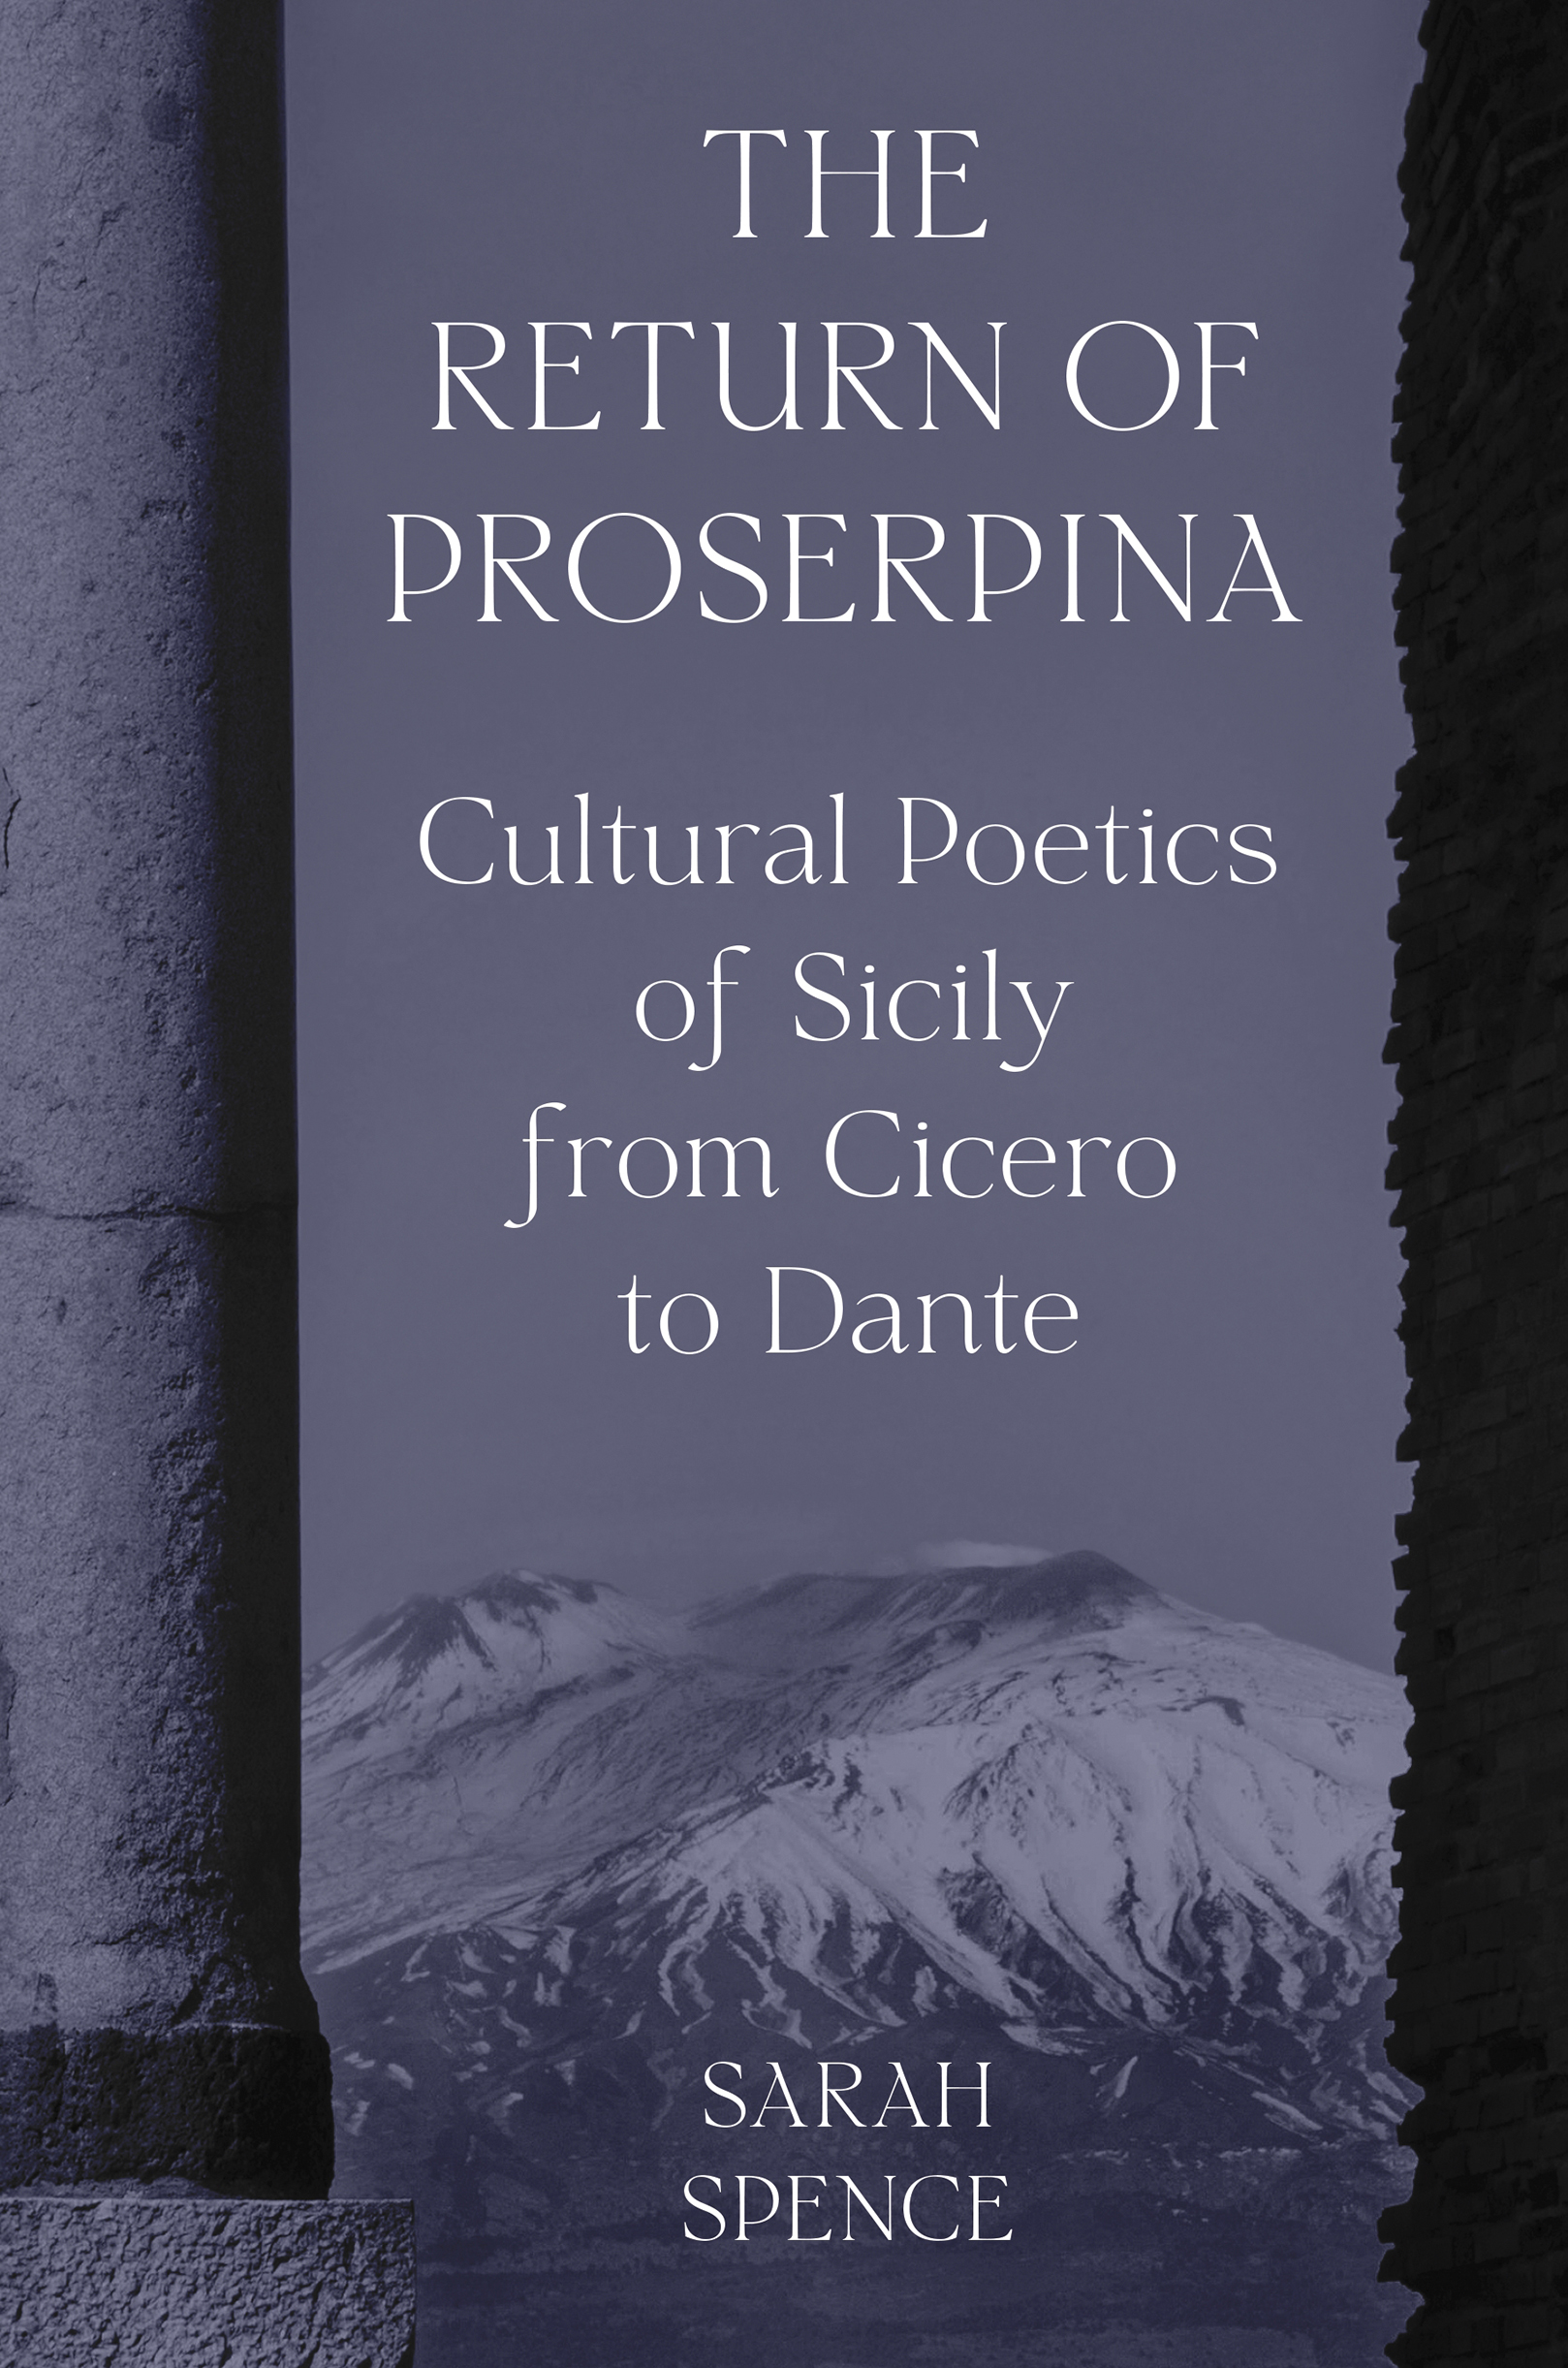 THE RETURN OF PROSERPINA The Return of Proserpina CULTURAL POETICS OF SICILY - photo 1